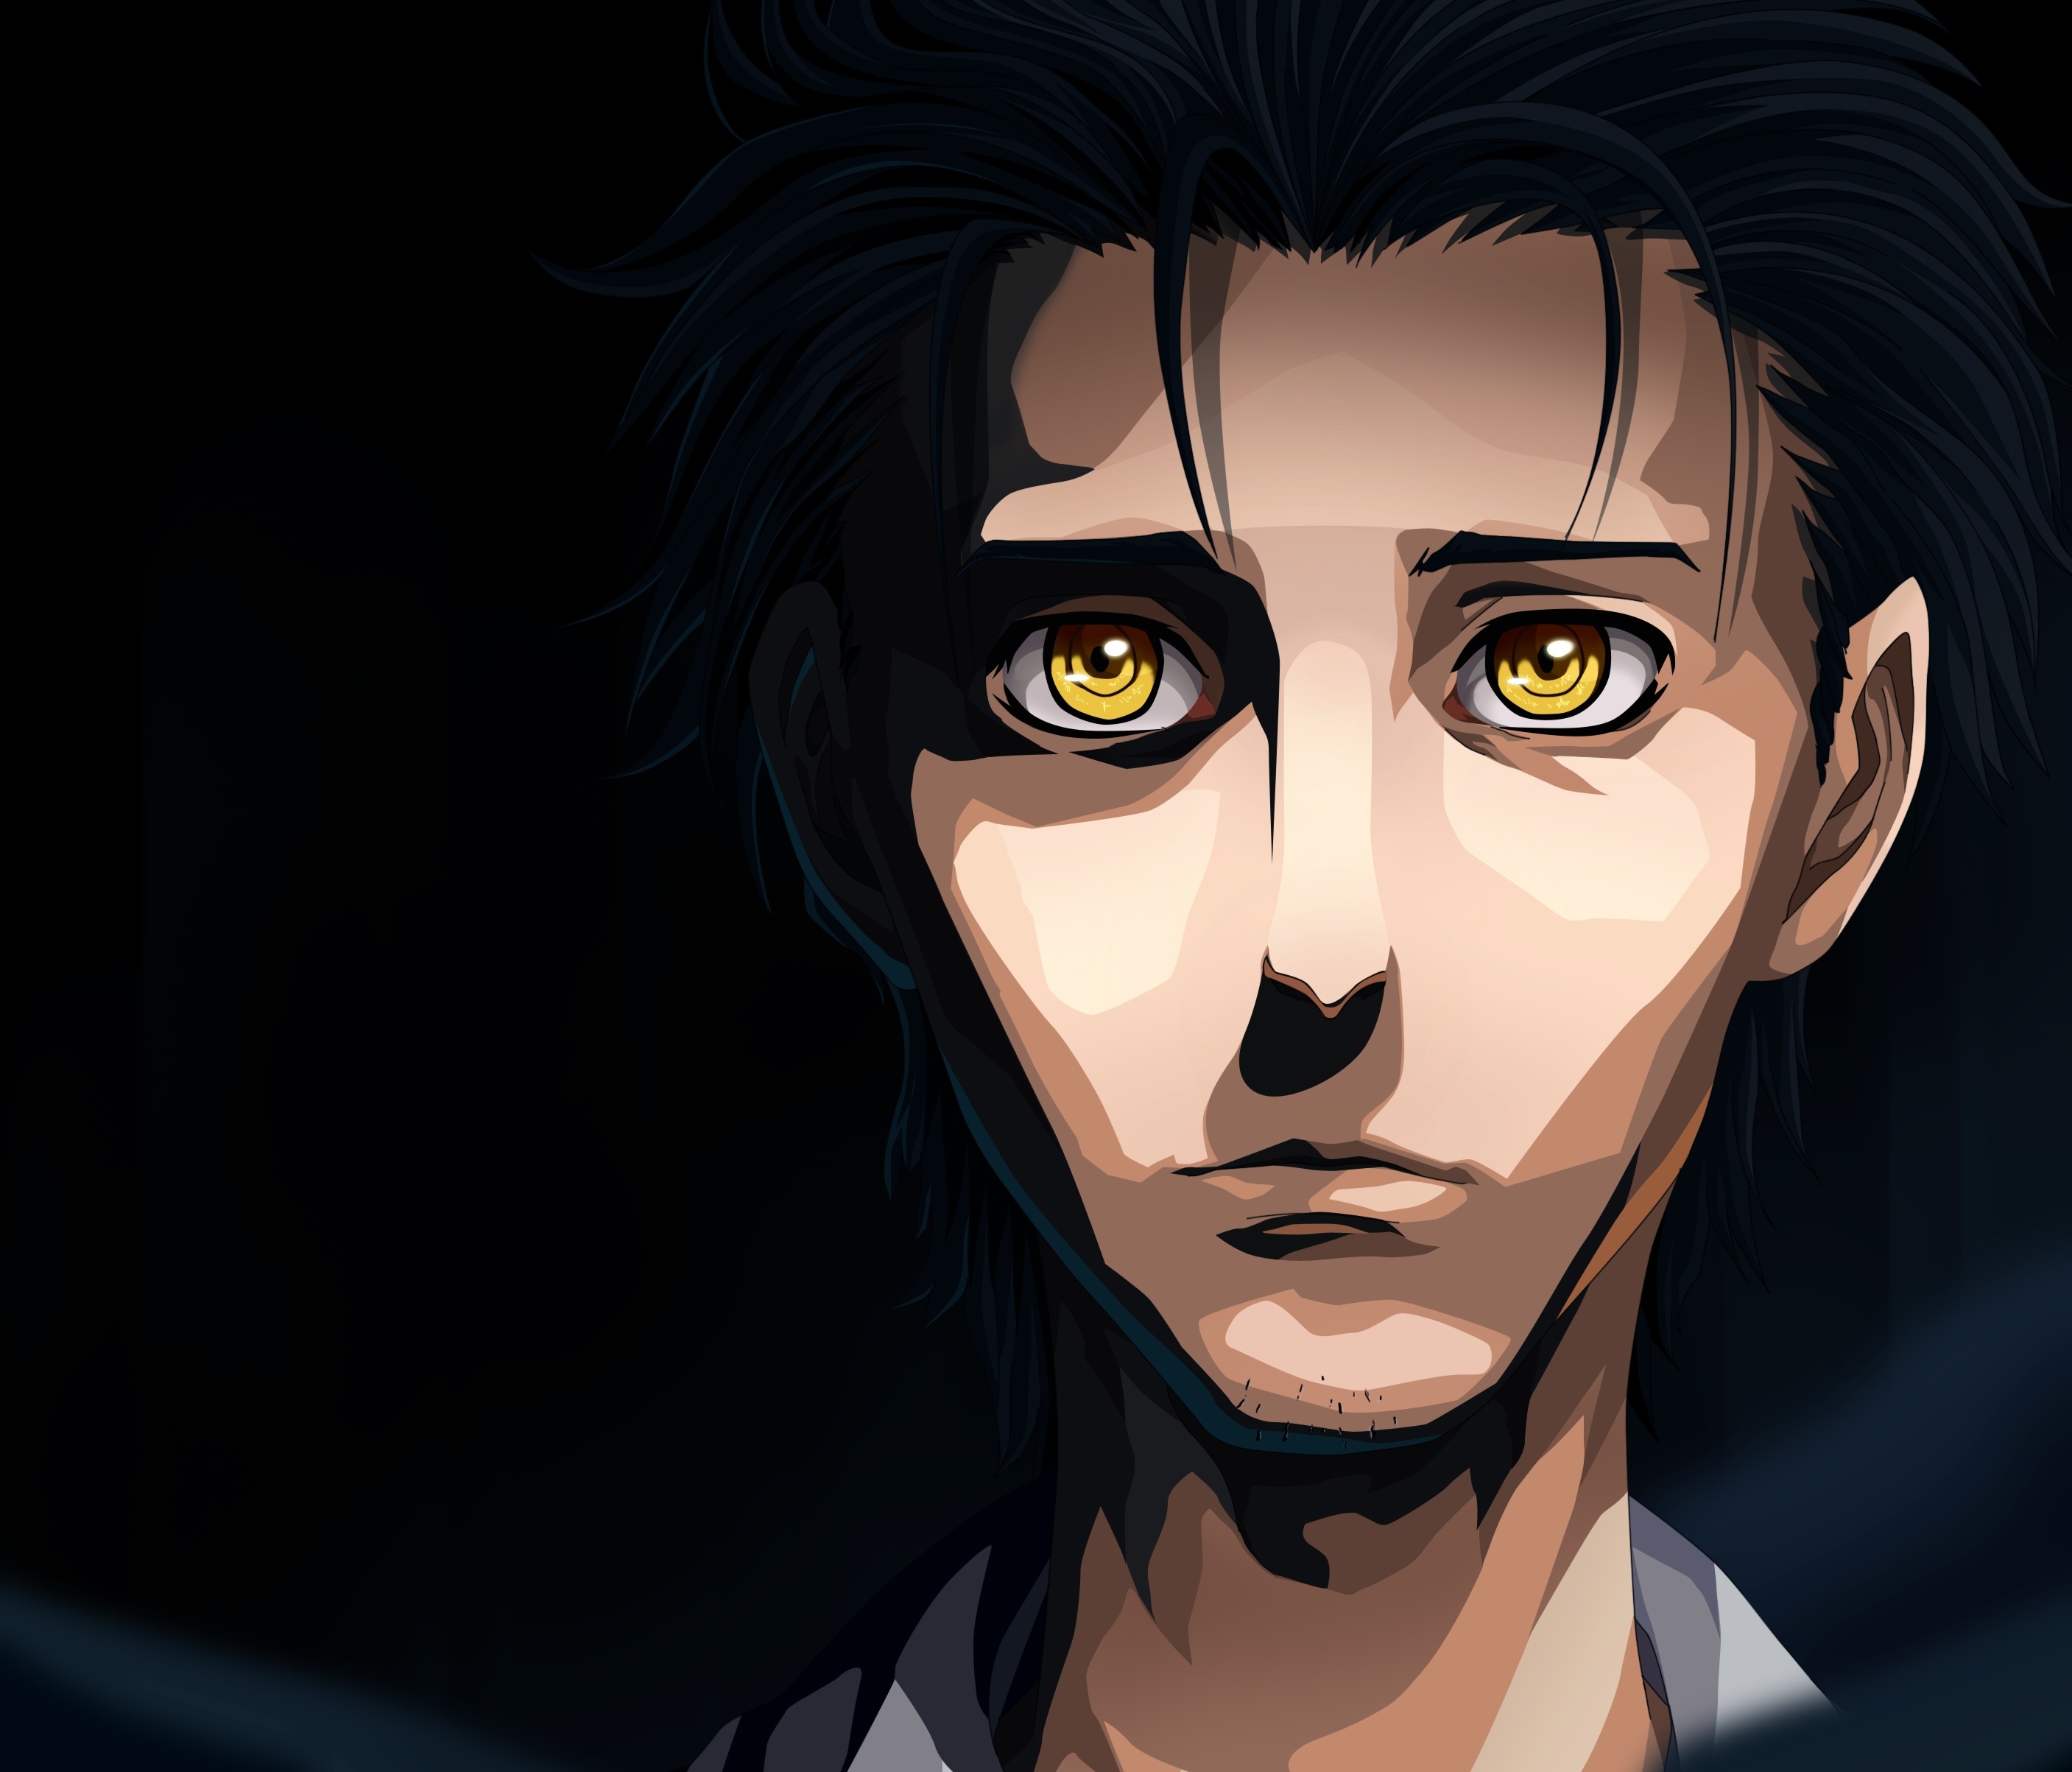 Rintarou Okabe Steins Gate Wallpaper Hd Anime 4k Wallpapers Images Photos And Background Wallpapers Den